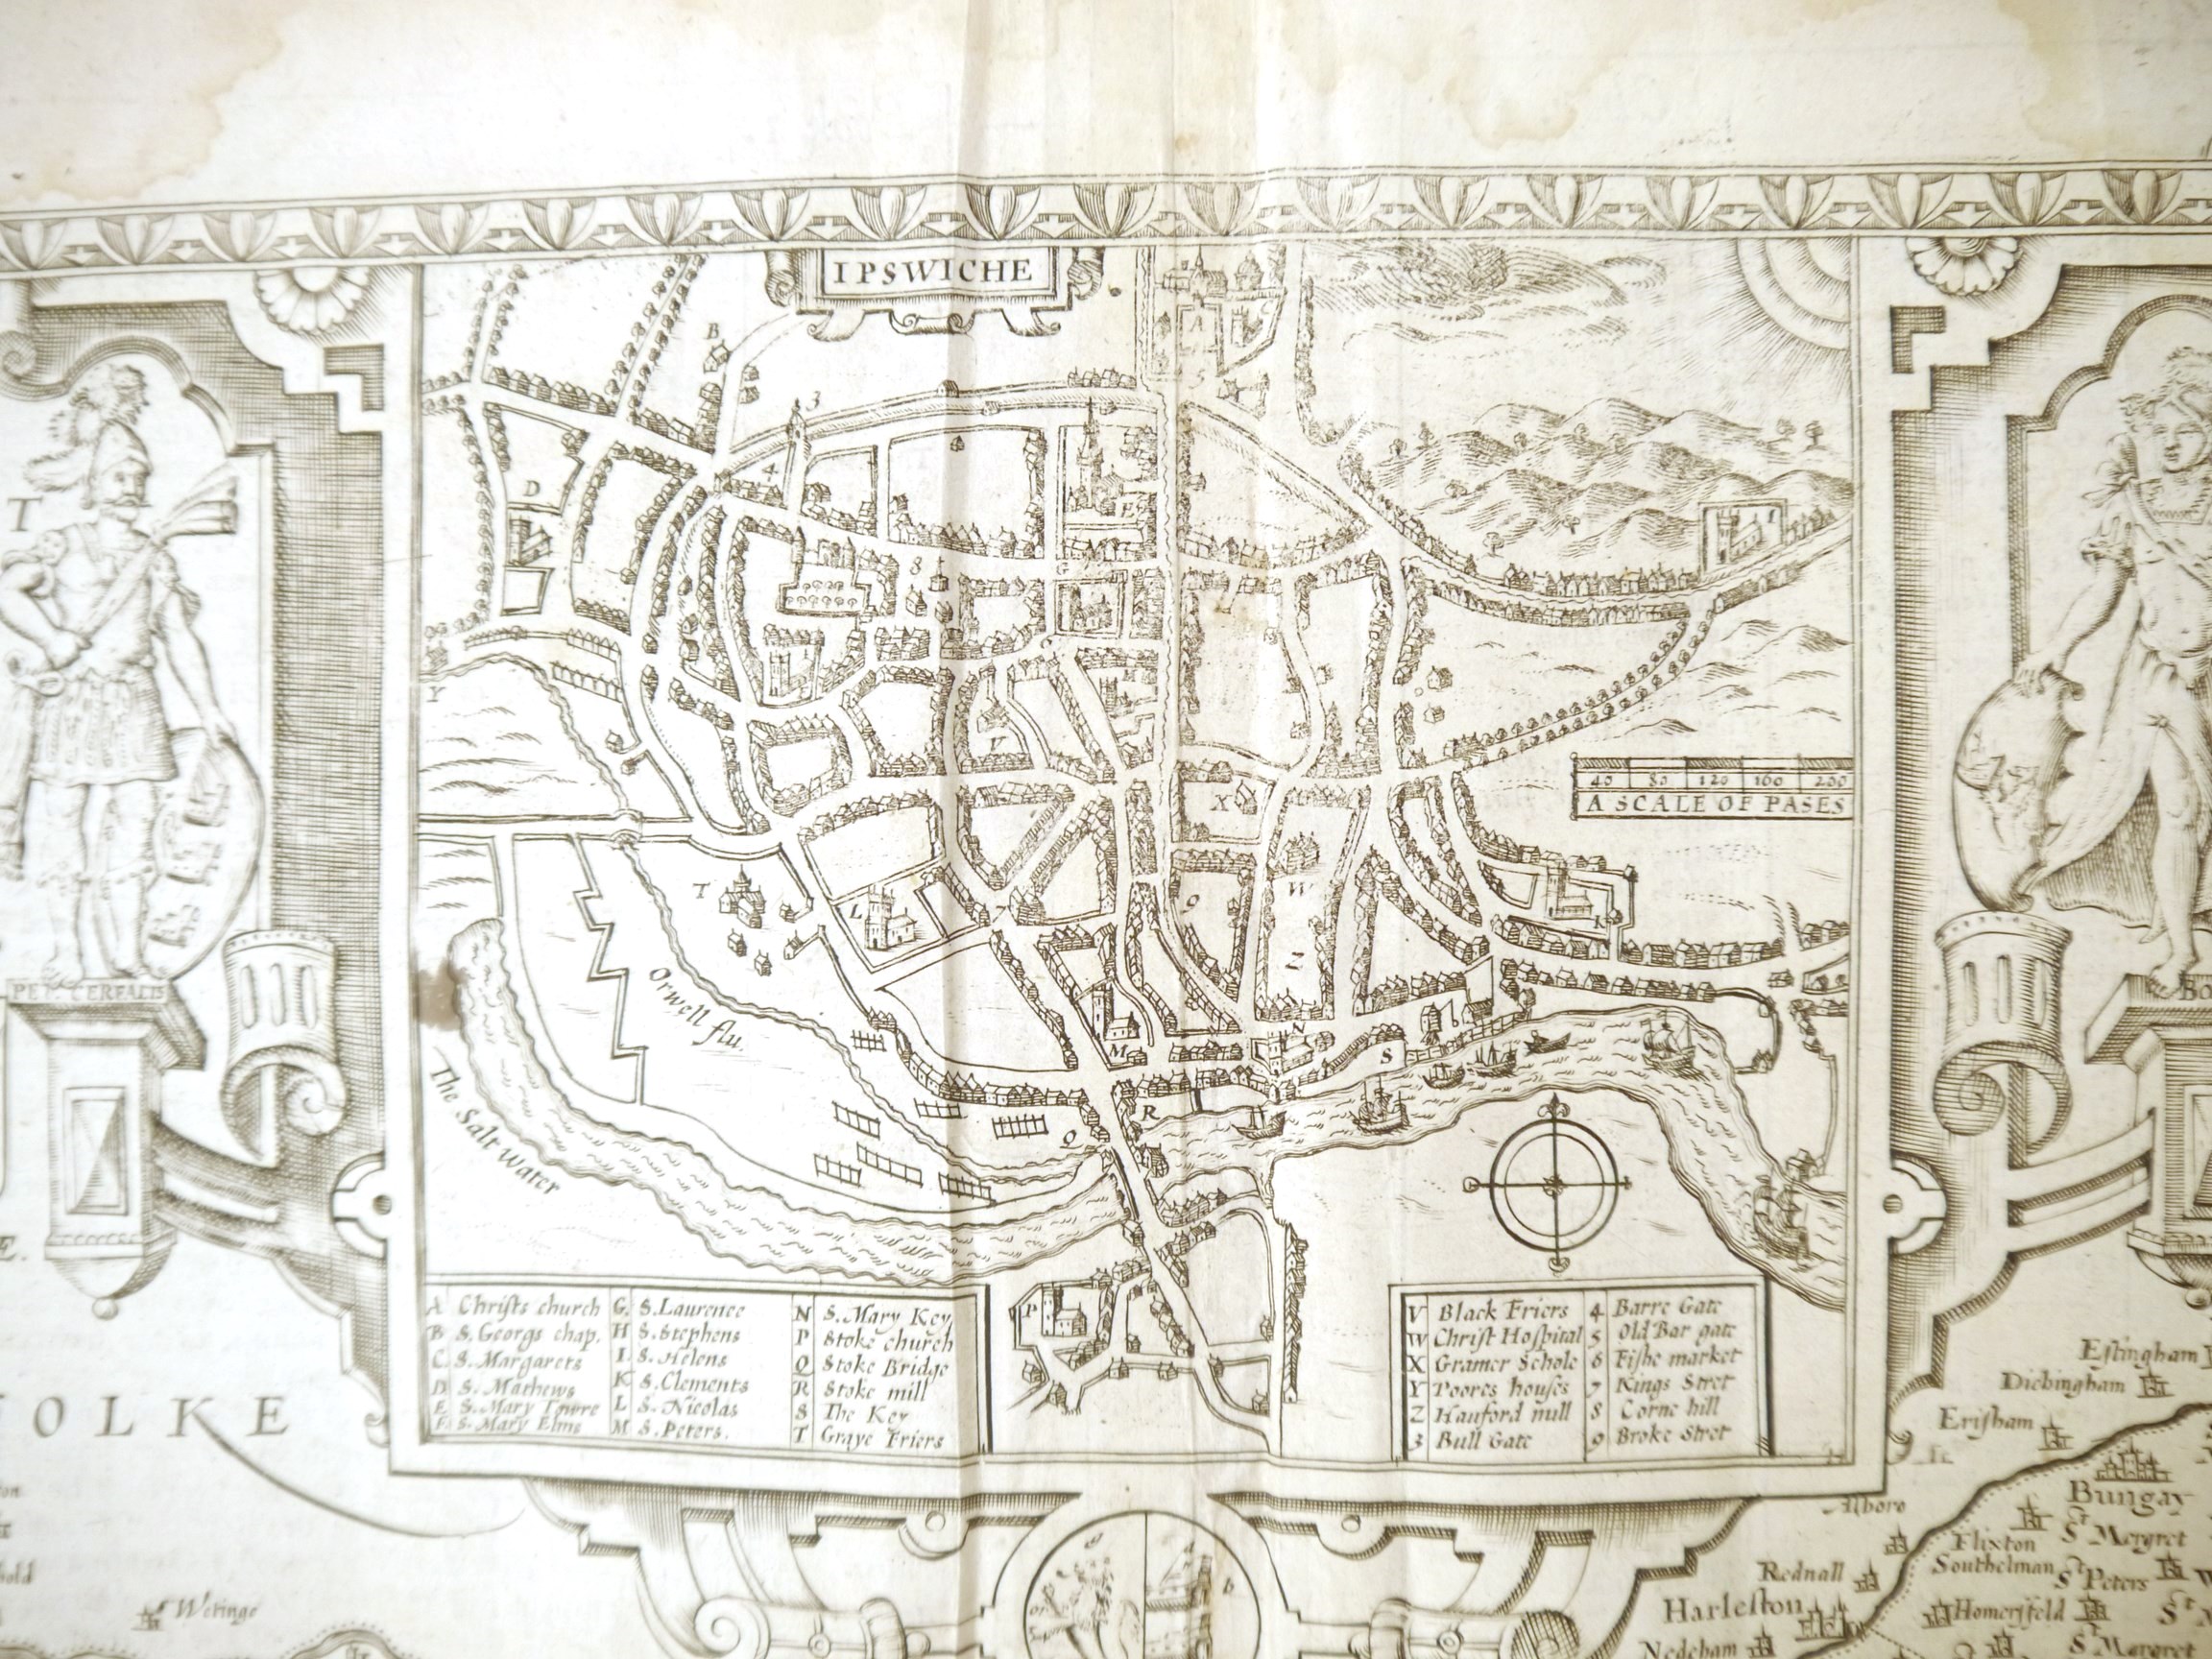 John Speed: 'Suffolk described and divided into hundreds [Suffolk]', engraved map, London, - Image 4 of 4